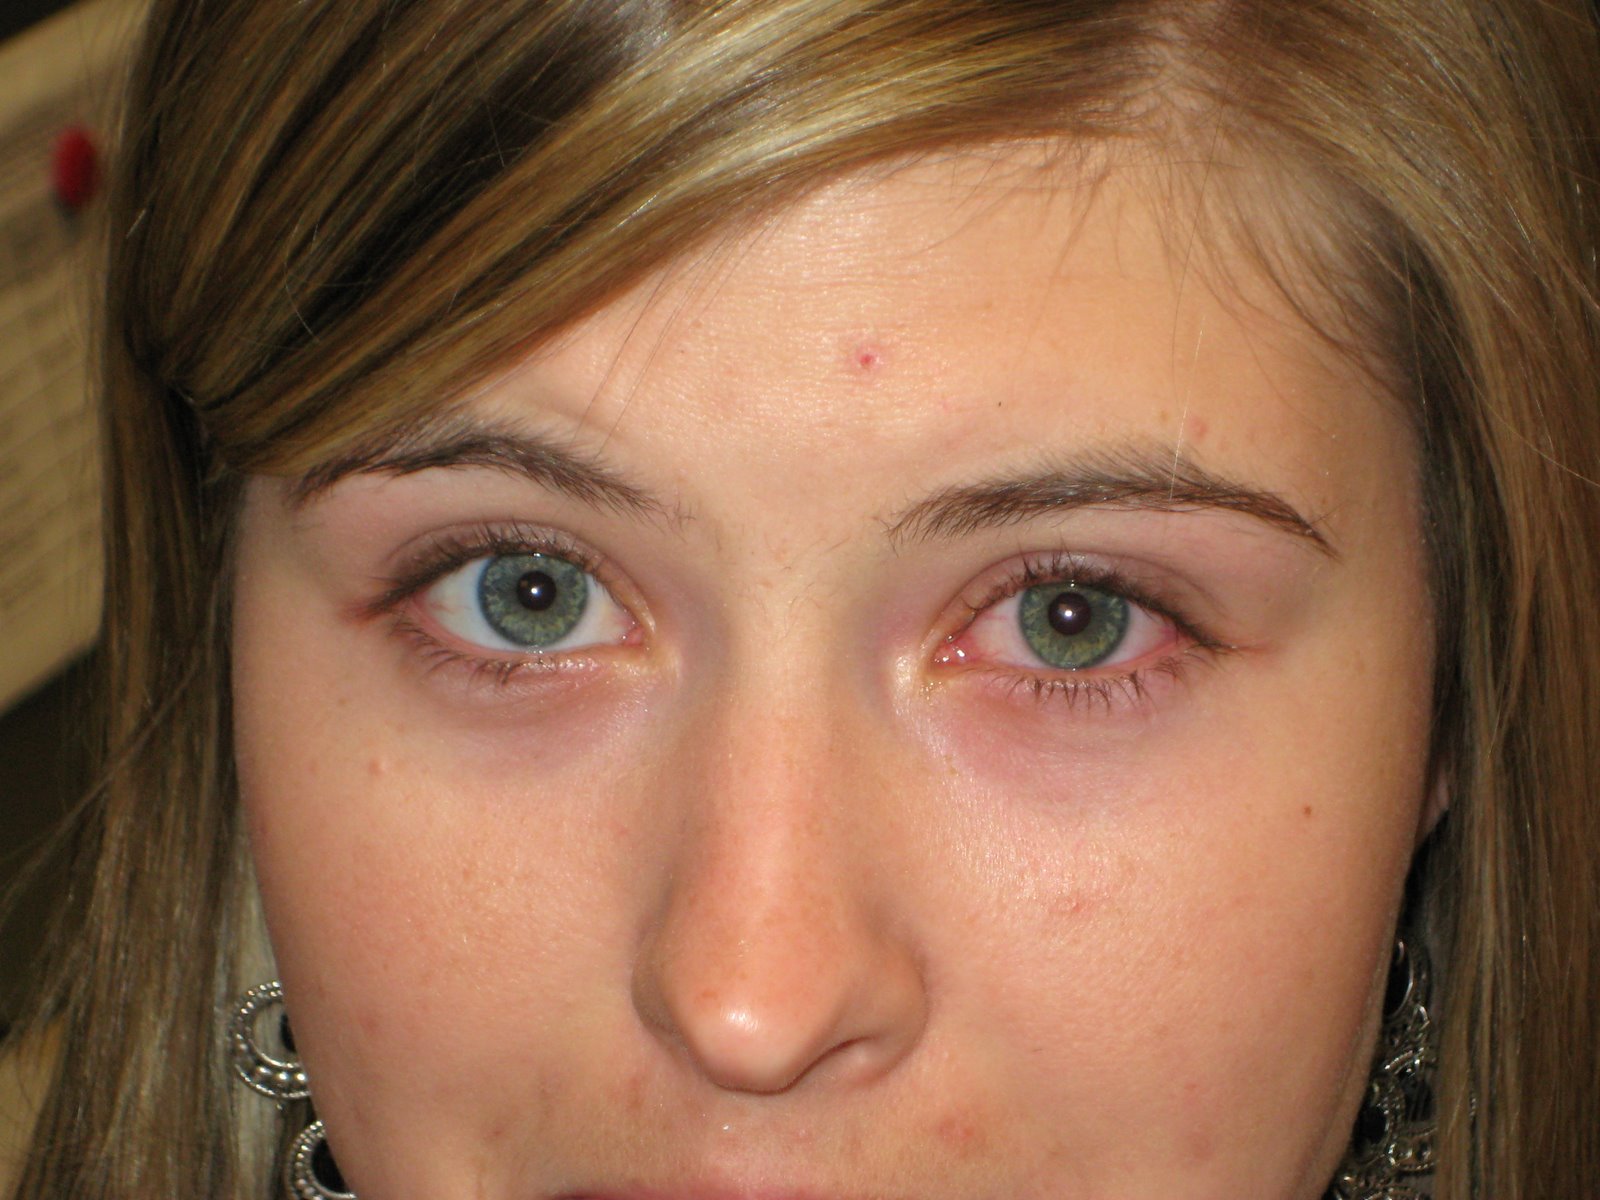 Conjunctivitis Images - Photos - Pictures - CrystalGraphics